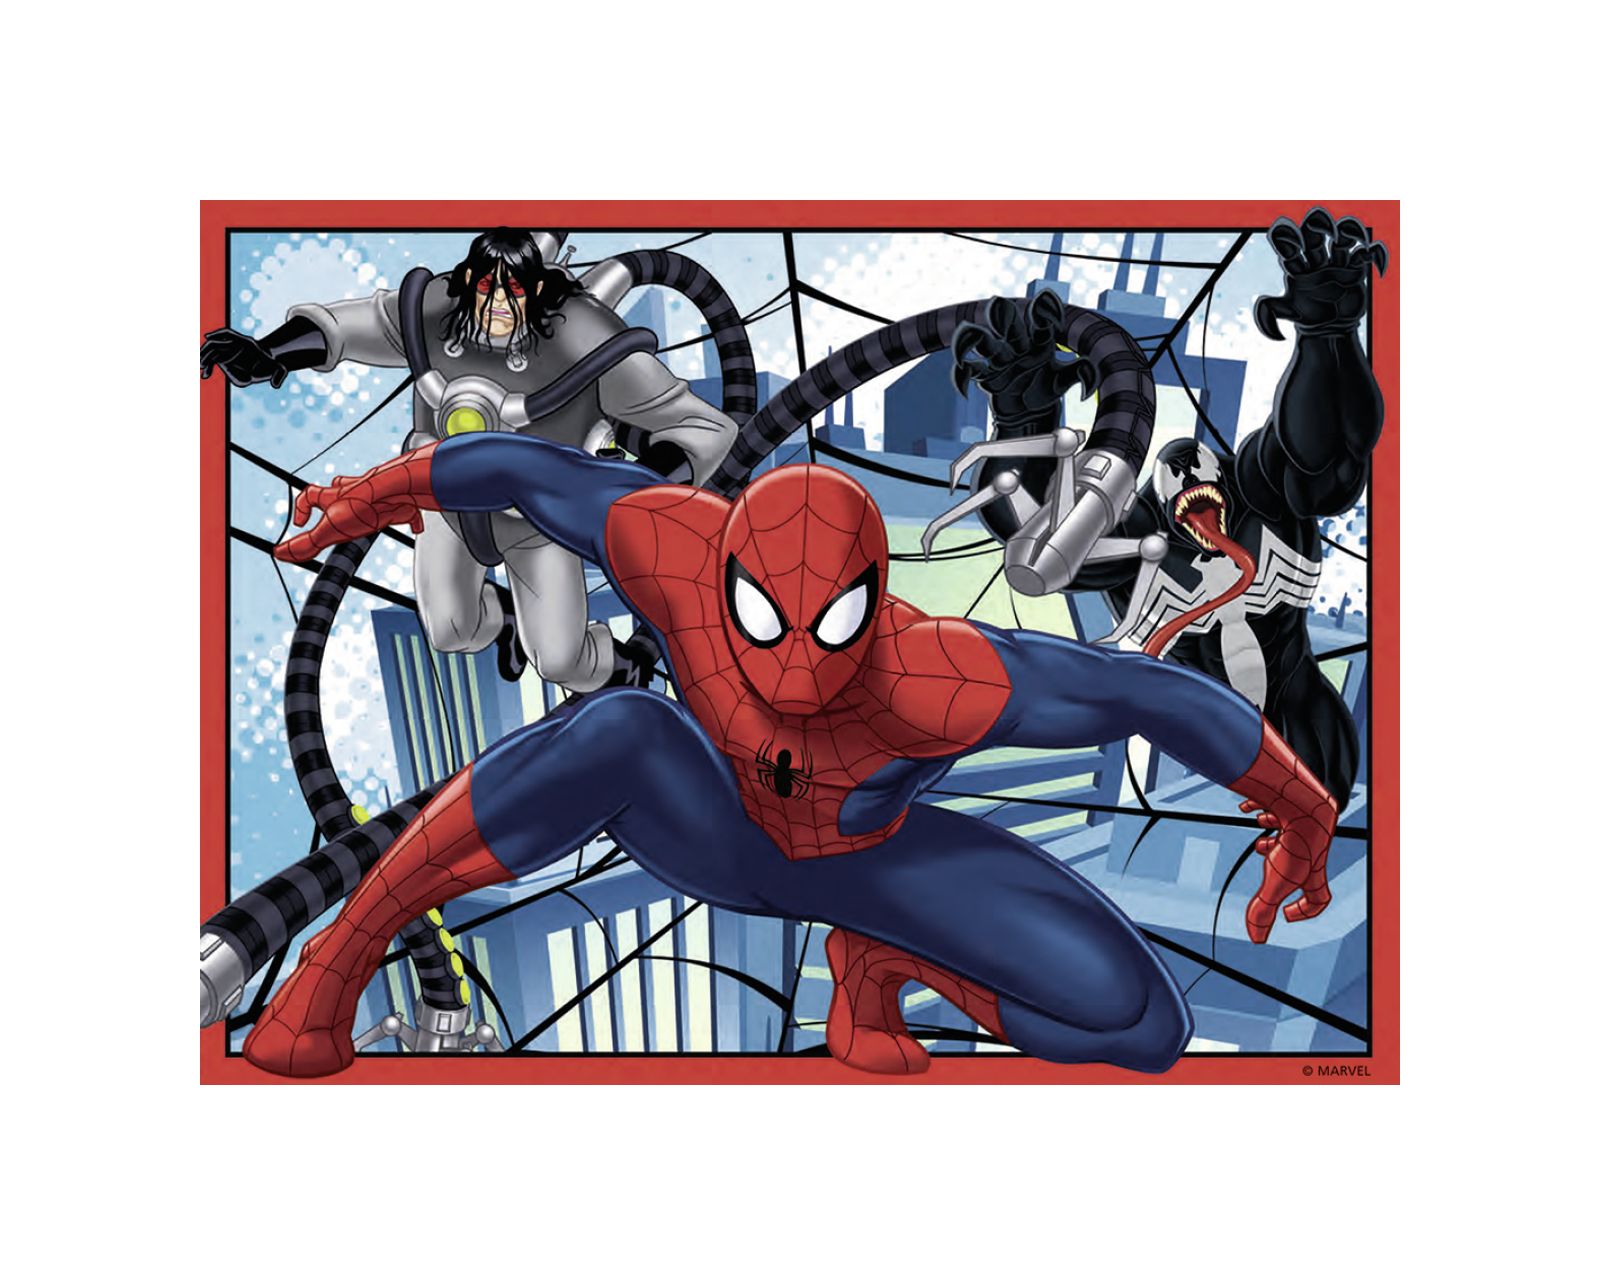 Ravensburger puzzle 4 in a box - ultimate spiderman - RAVENSBURGER, Spiderman